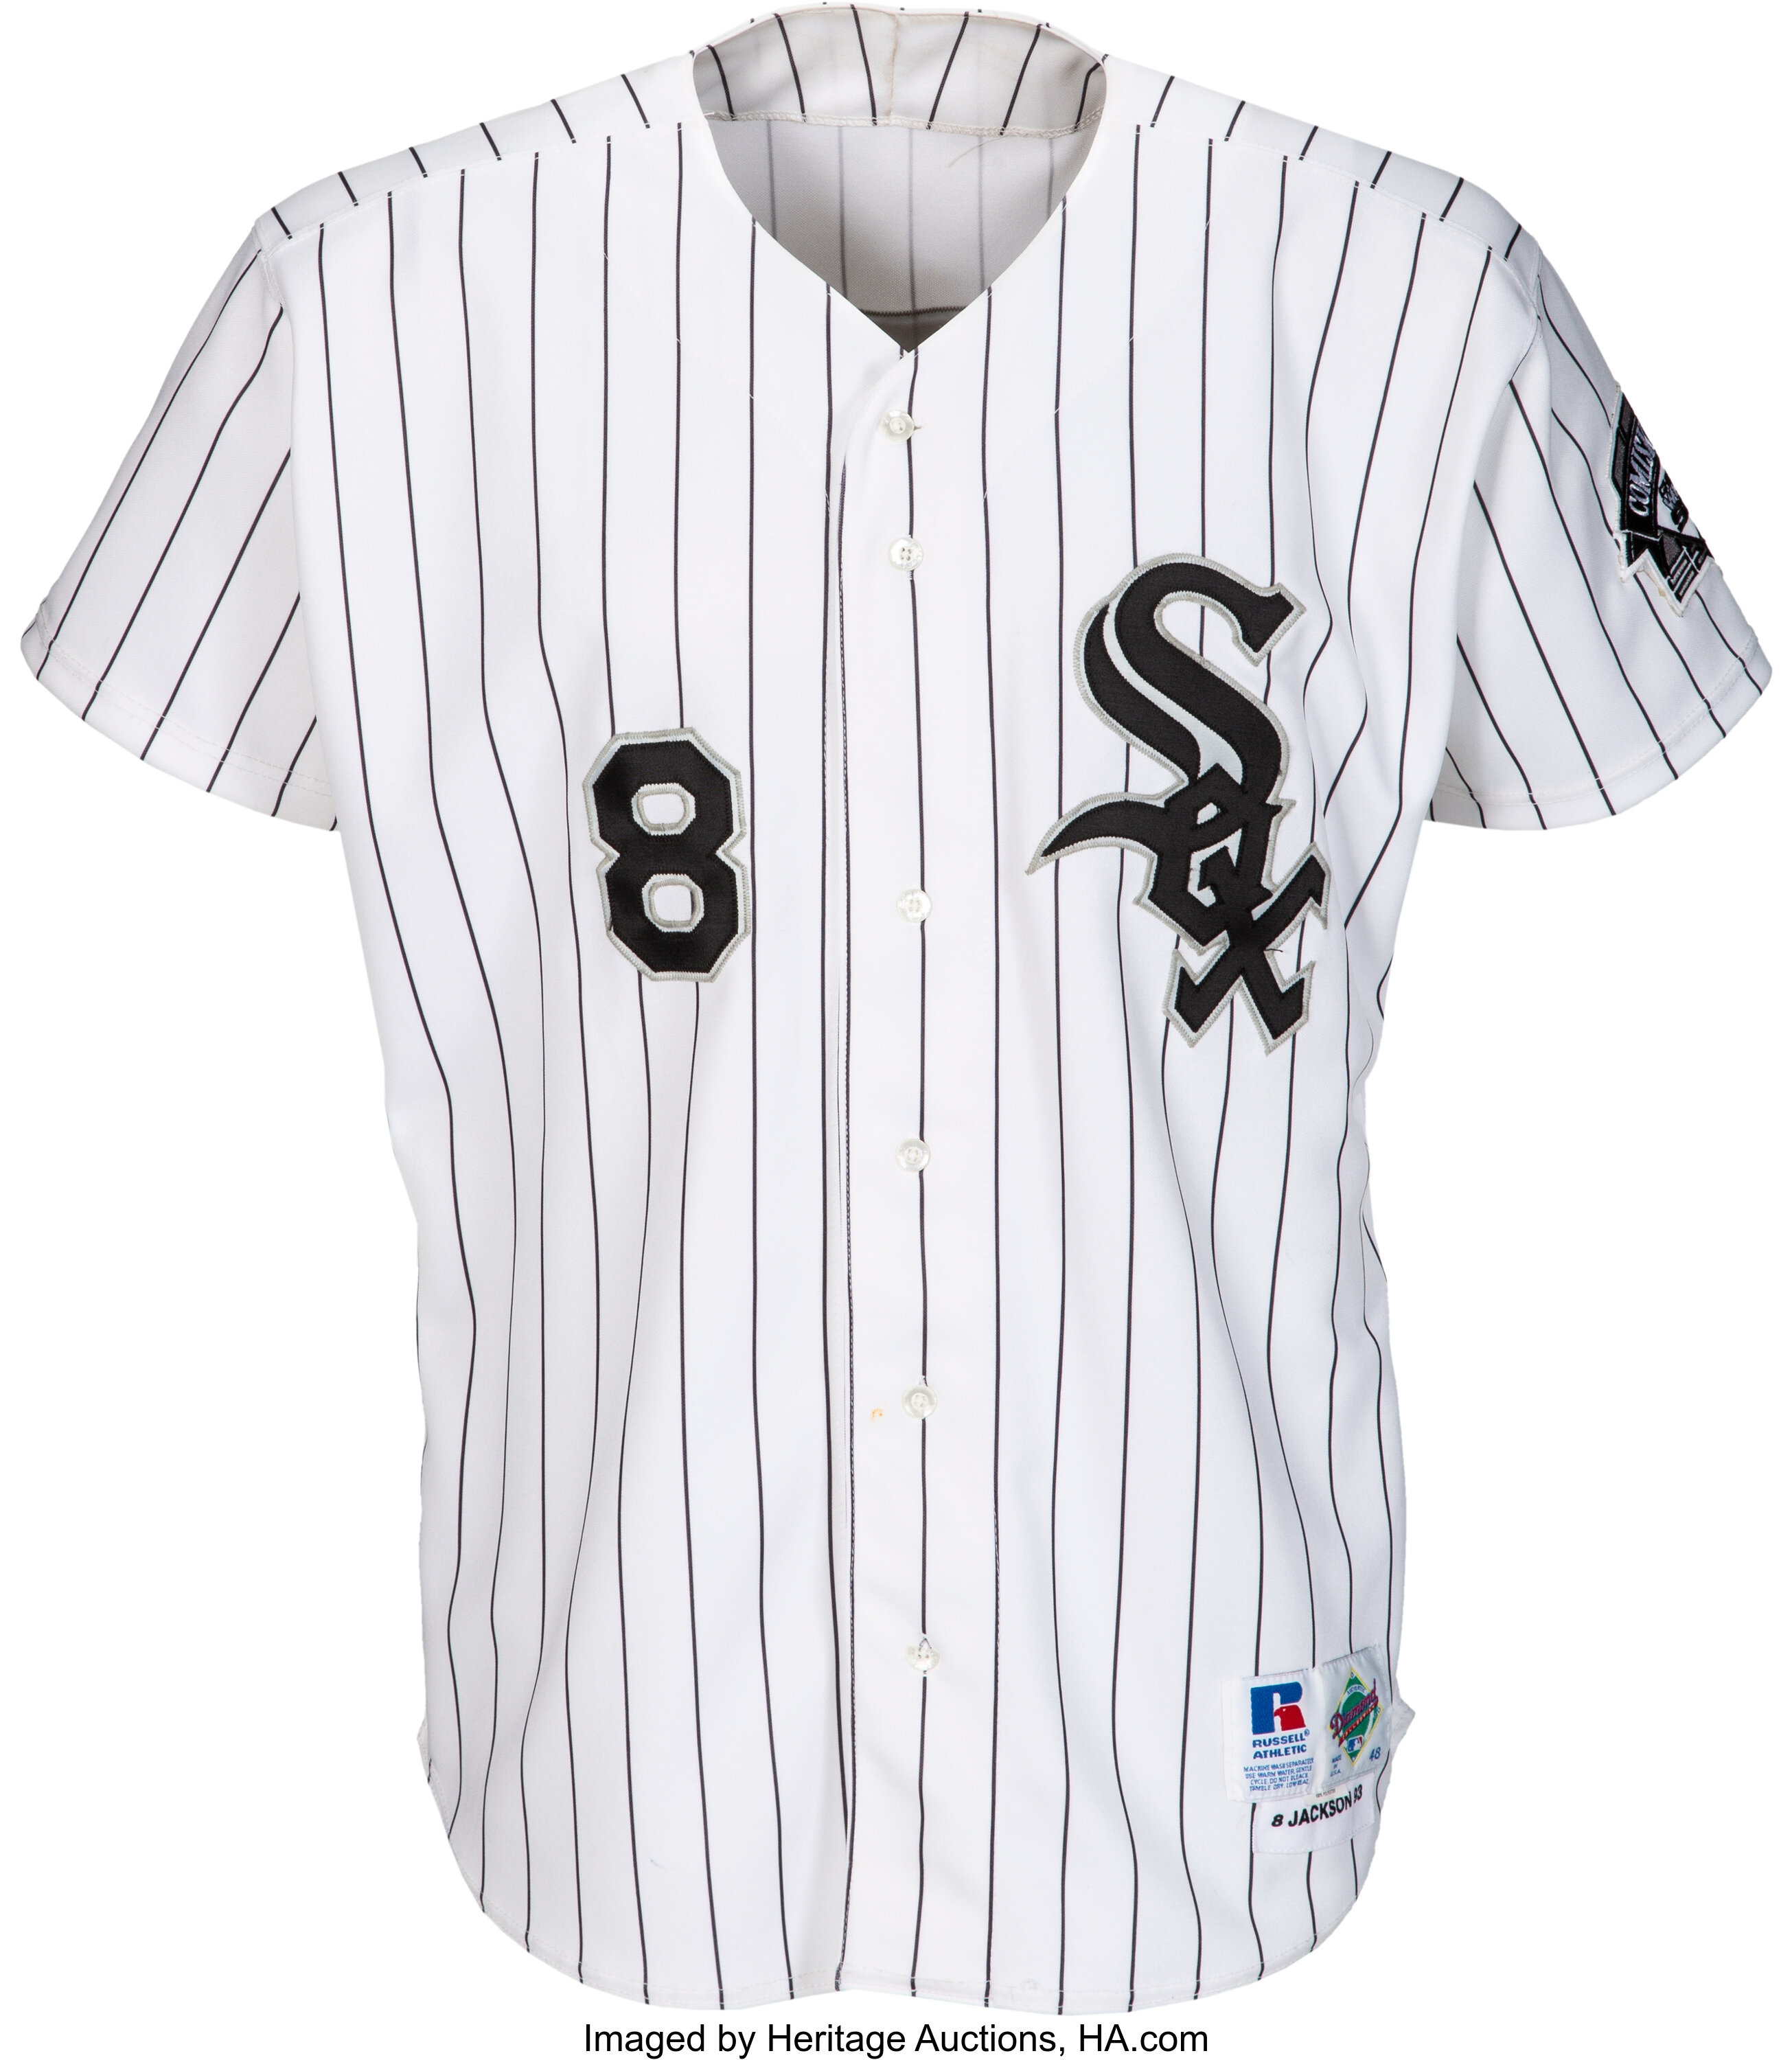 1991 Bo Jackson Game Used & Signed Chicago White Sox Road Jersey, Sotheby's & Goldin Auctions Present: A Century of Champions, 2020